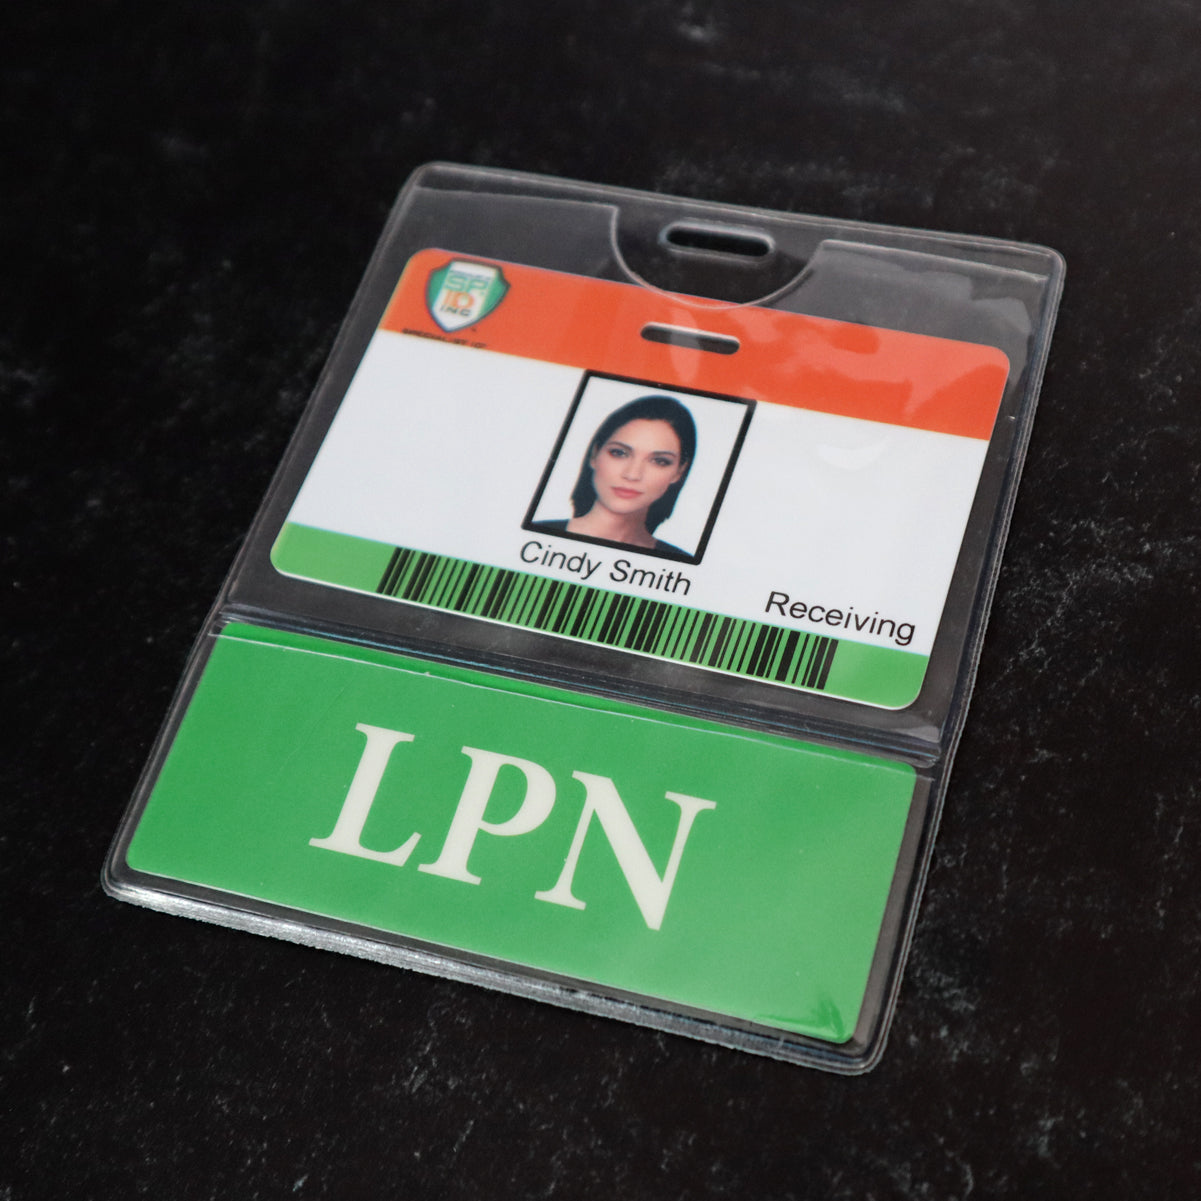 A name badge in a clear badge holder with a photo, labeled "Cindy Smith, Receiving." Below it, a green card with white letters "LPN" peeks out from the Custom Printed BadgeBottoms® Horizontal (Badge Holder & Badge Buddy IN ONE), making the setup customizable for any title.